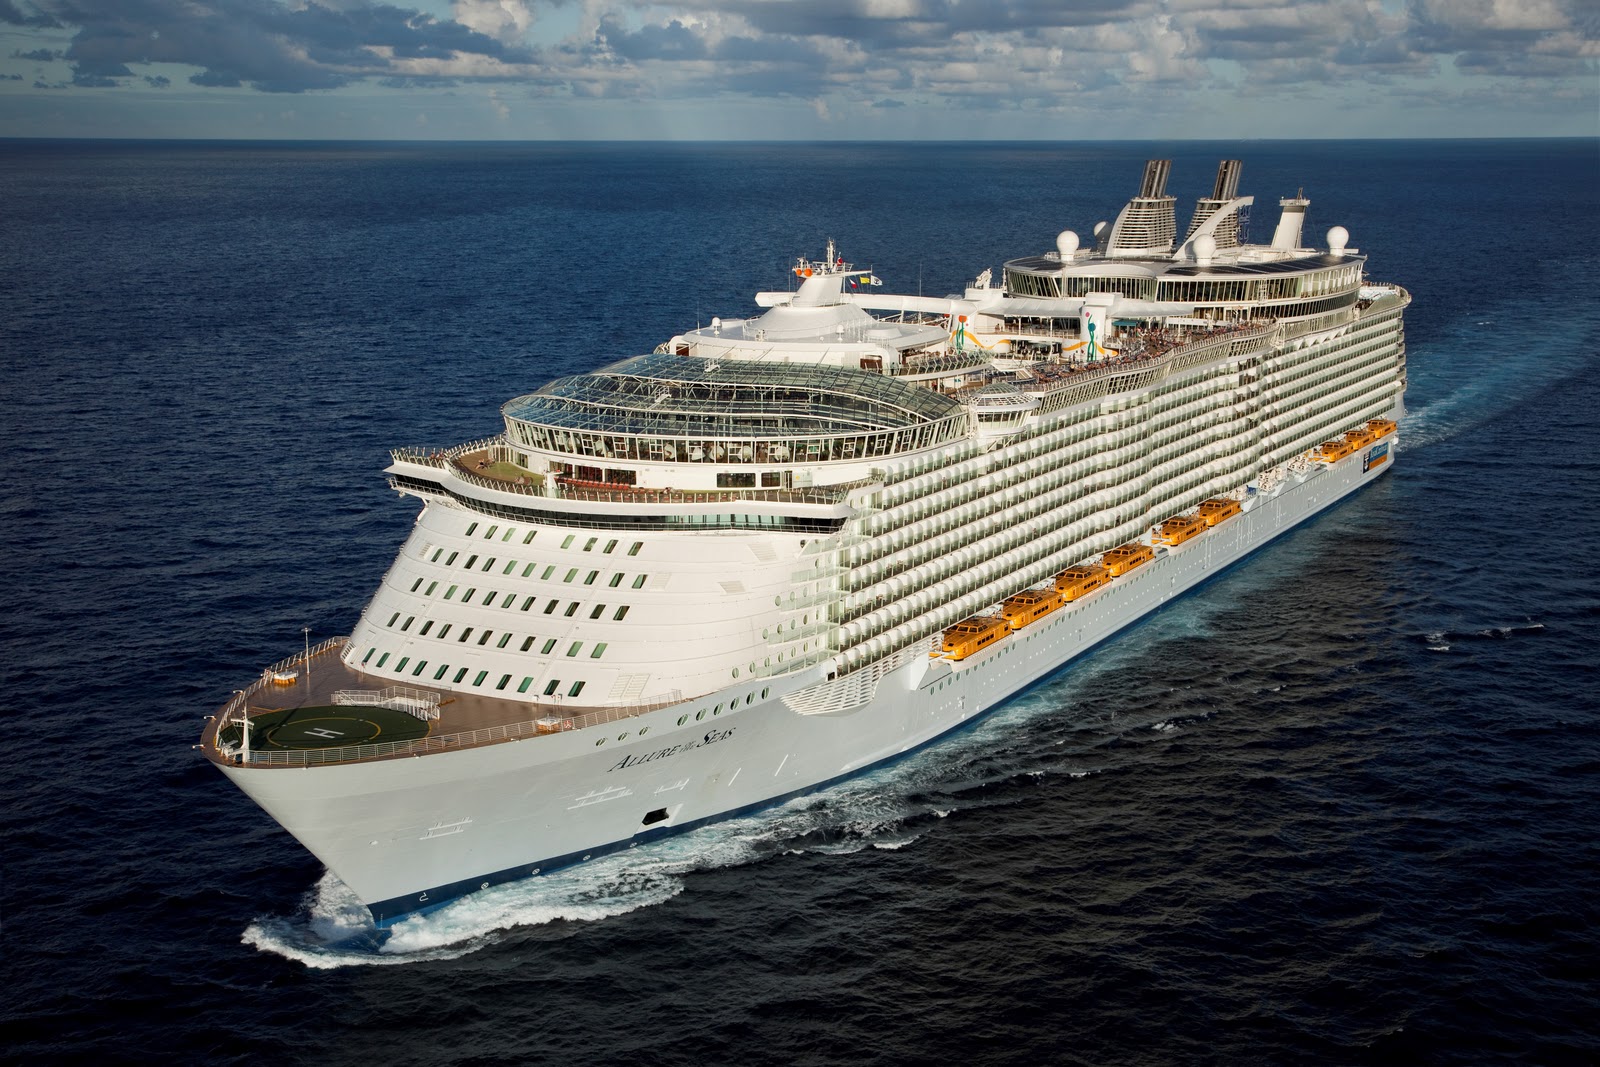 The Travel Authority: The Allure of the Seas. Royal Caribbean’s newest